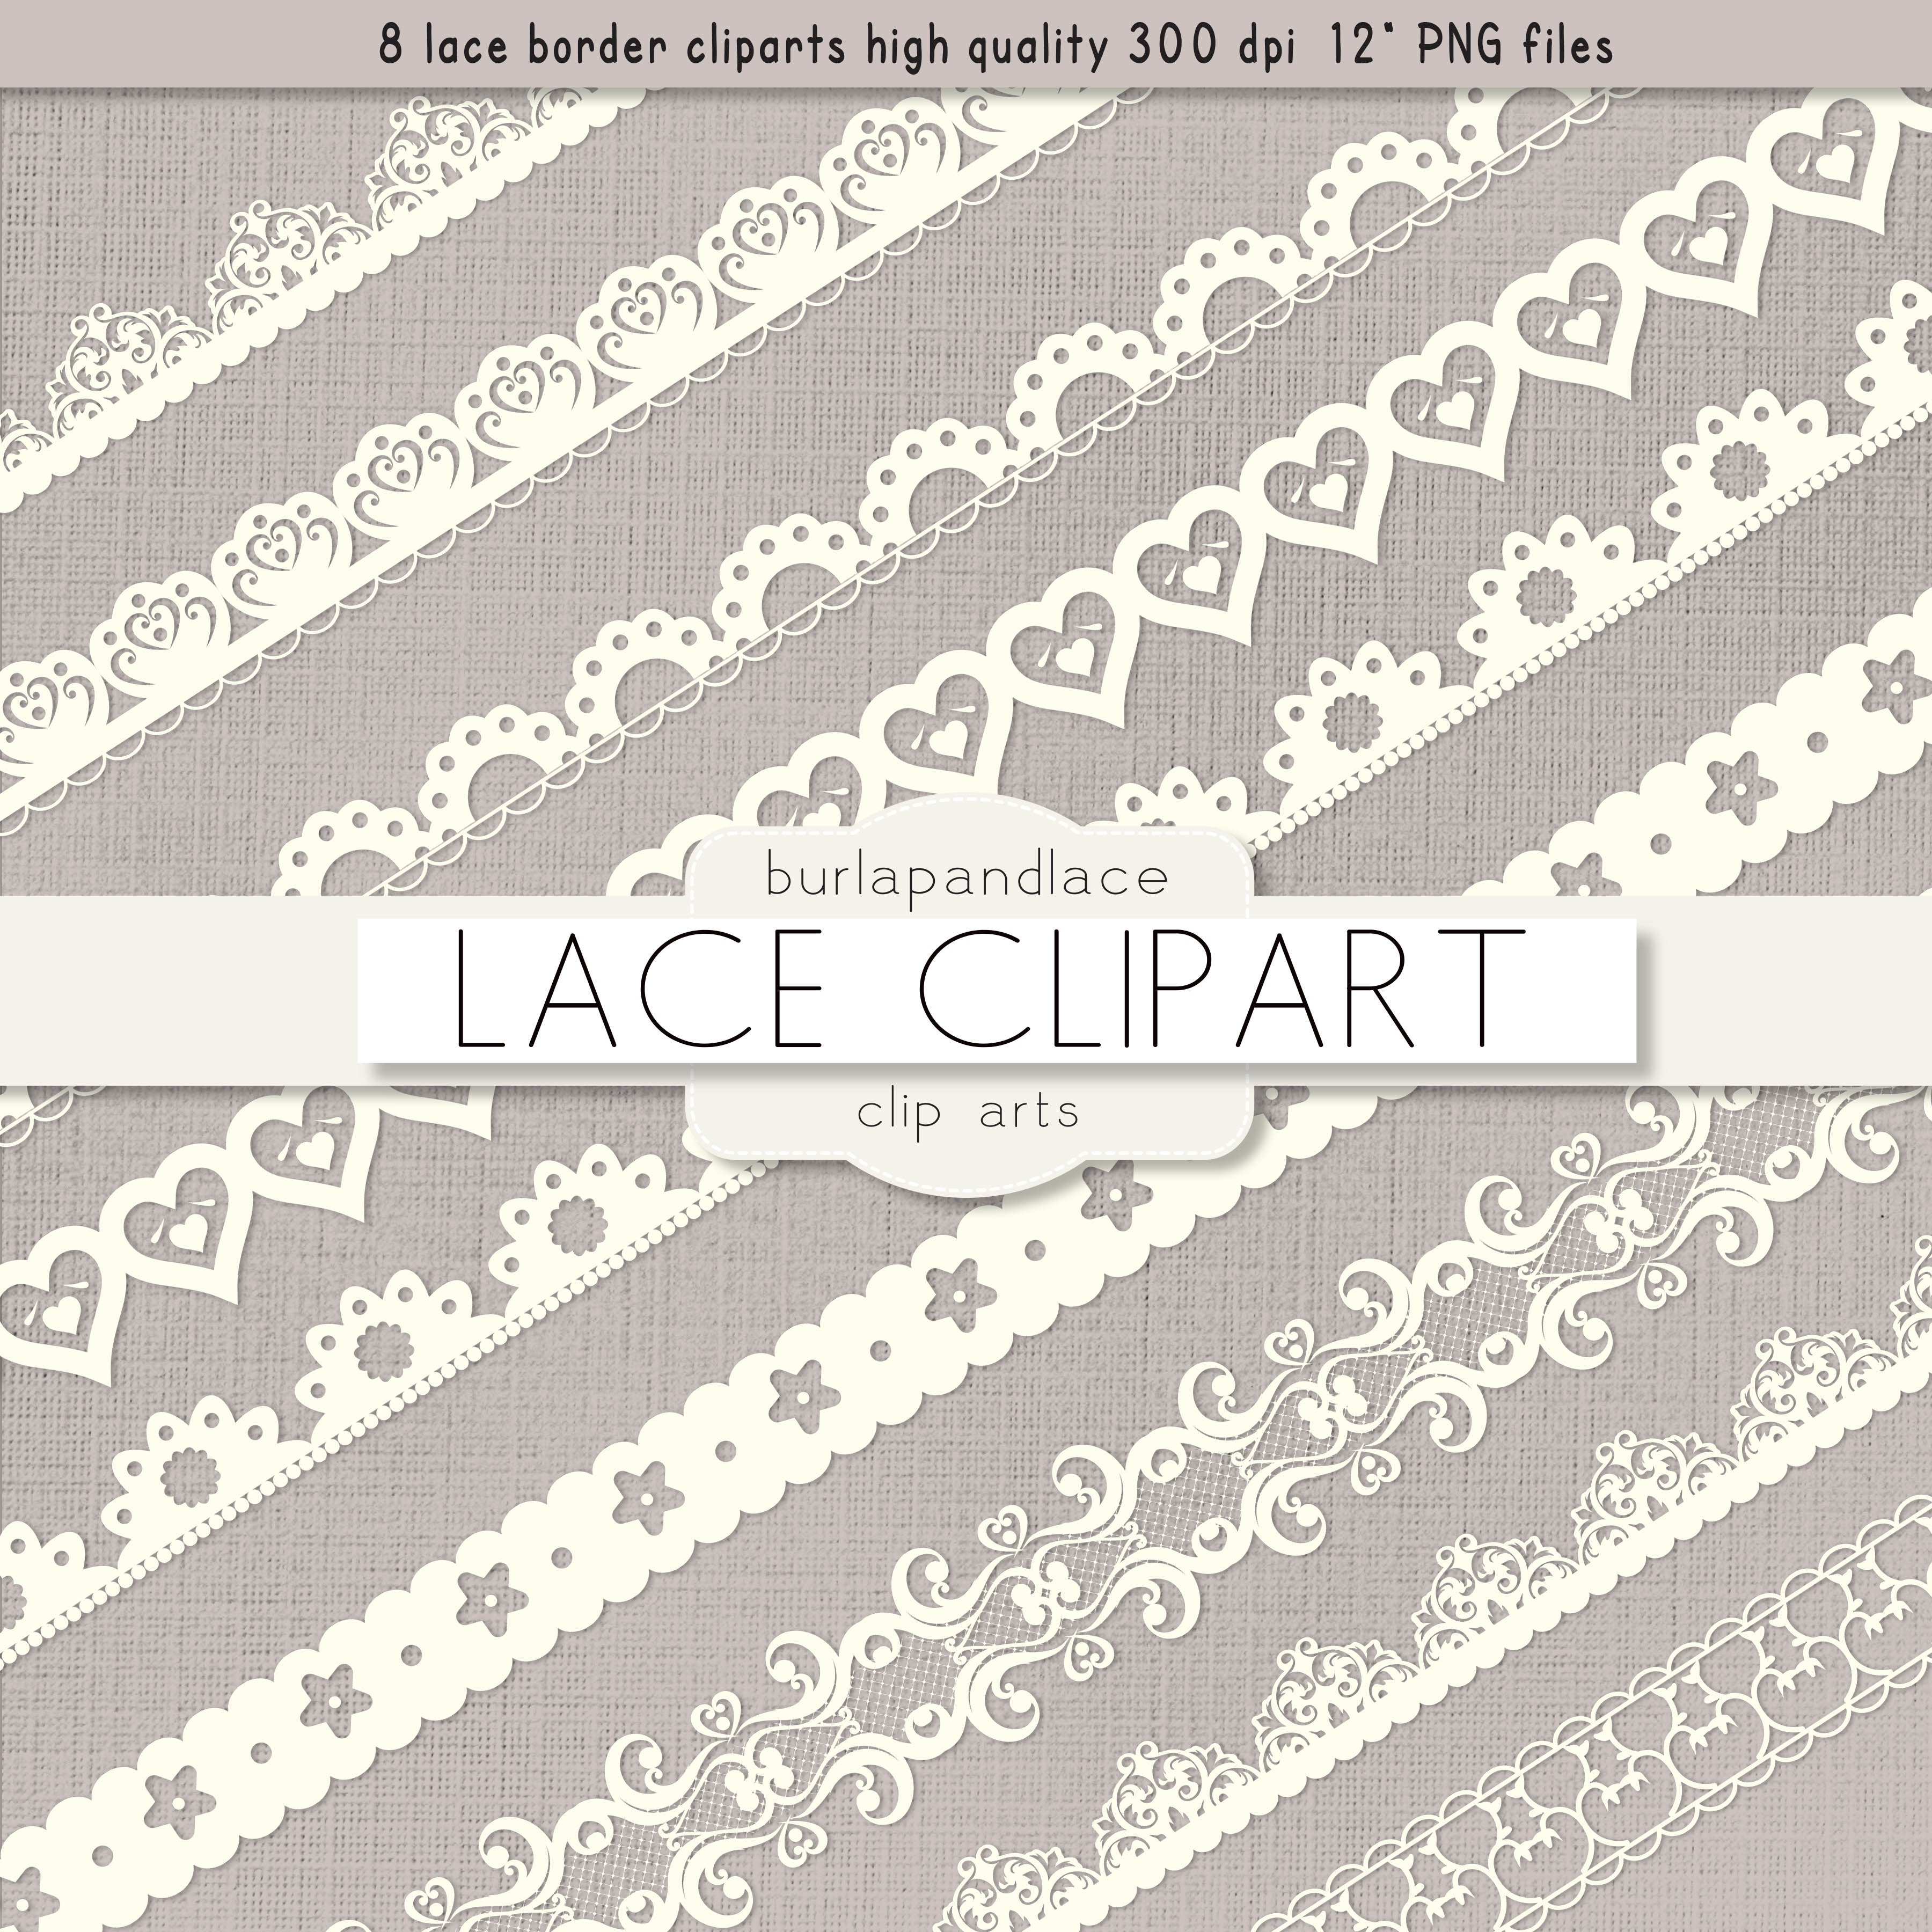 Ivory lace borders clipart ~ Illustrations on Creative Market